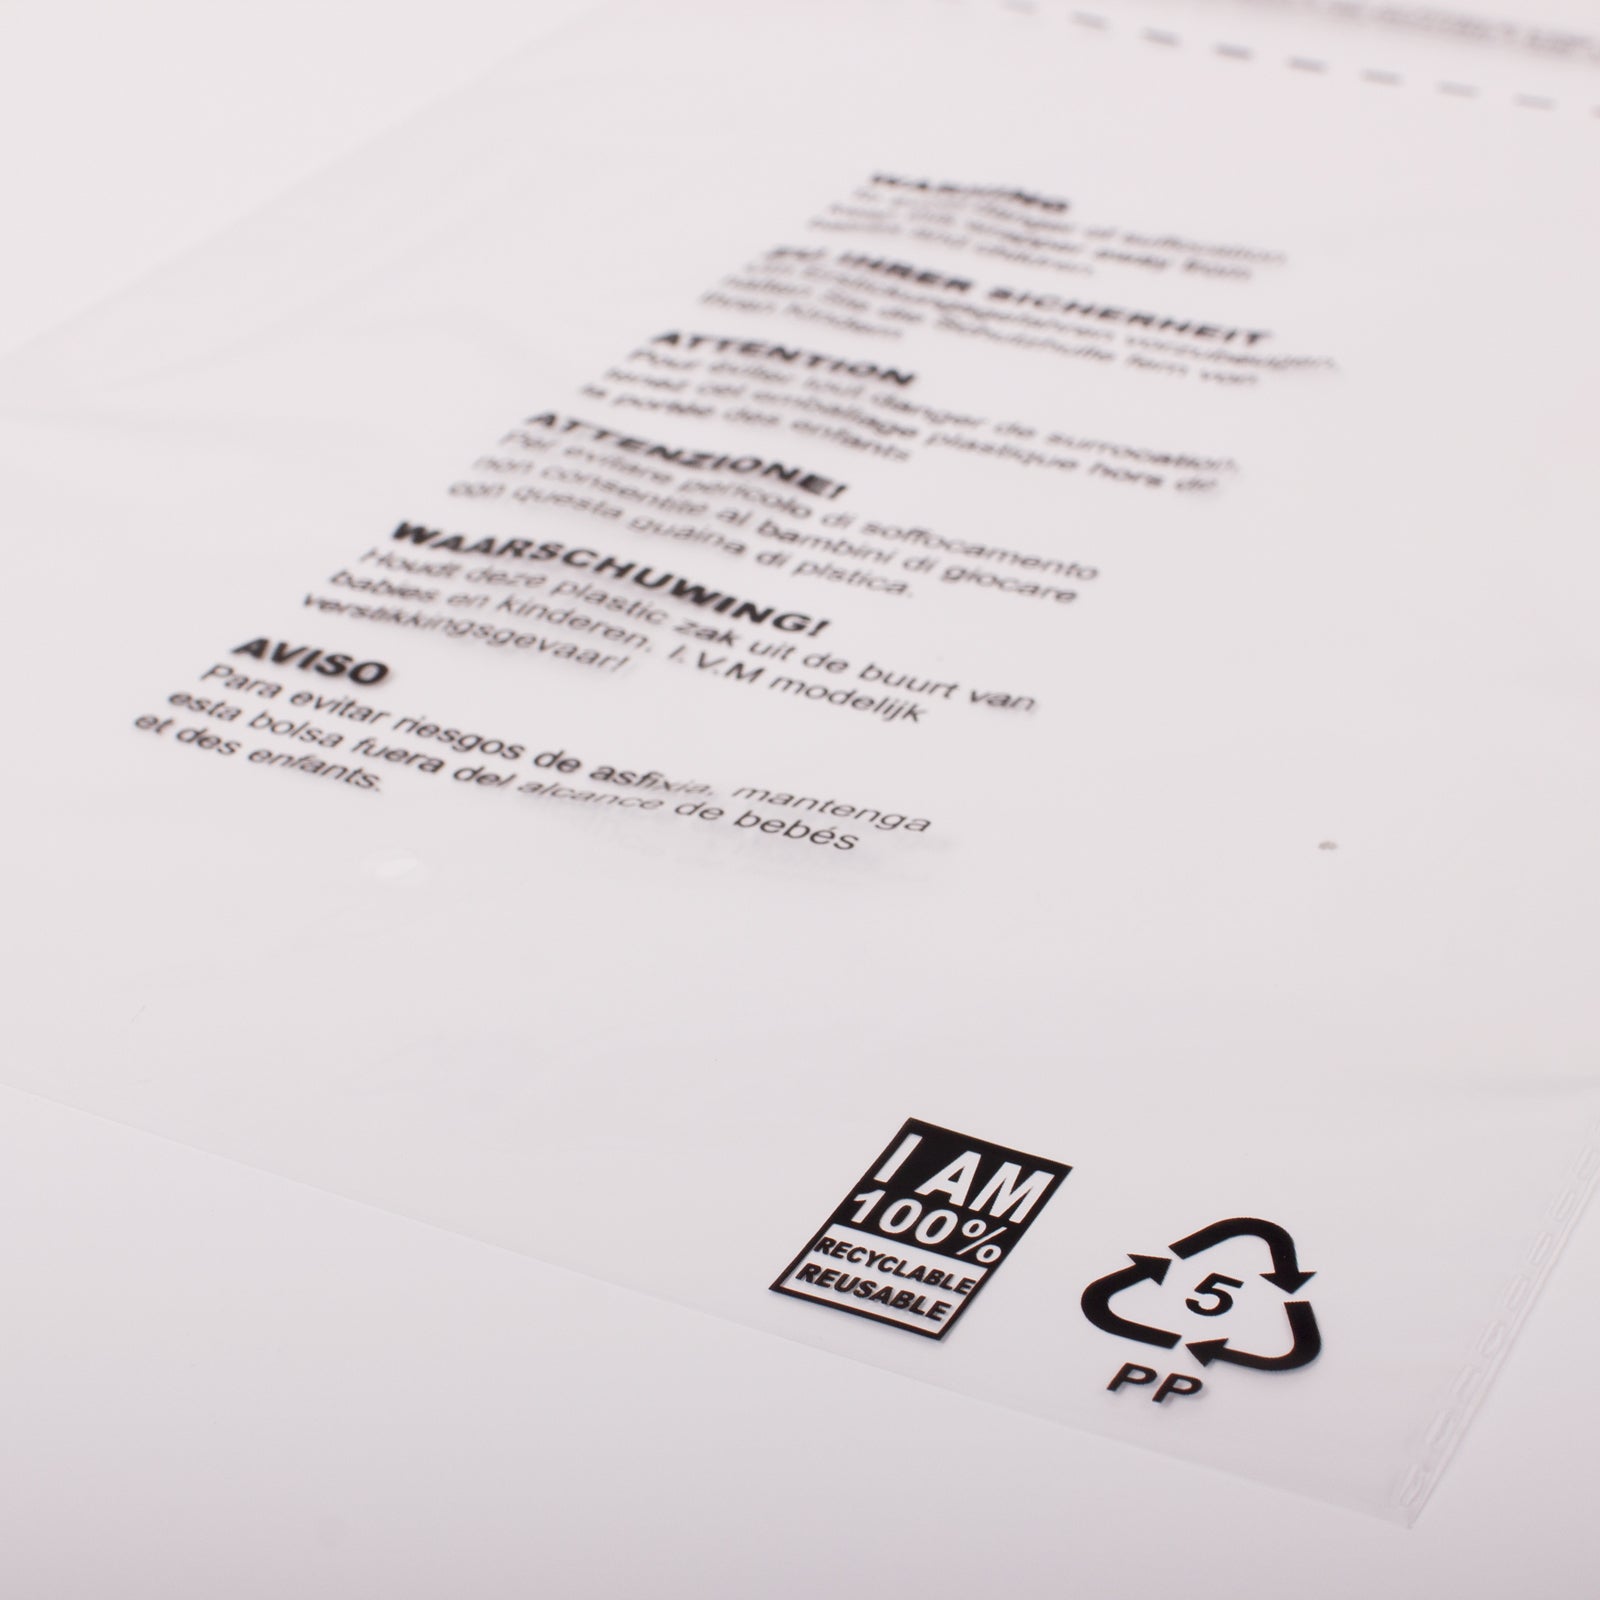 10x12 Clear Mailing Bag with 'I AM 100% RECYCLABLE'